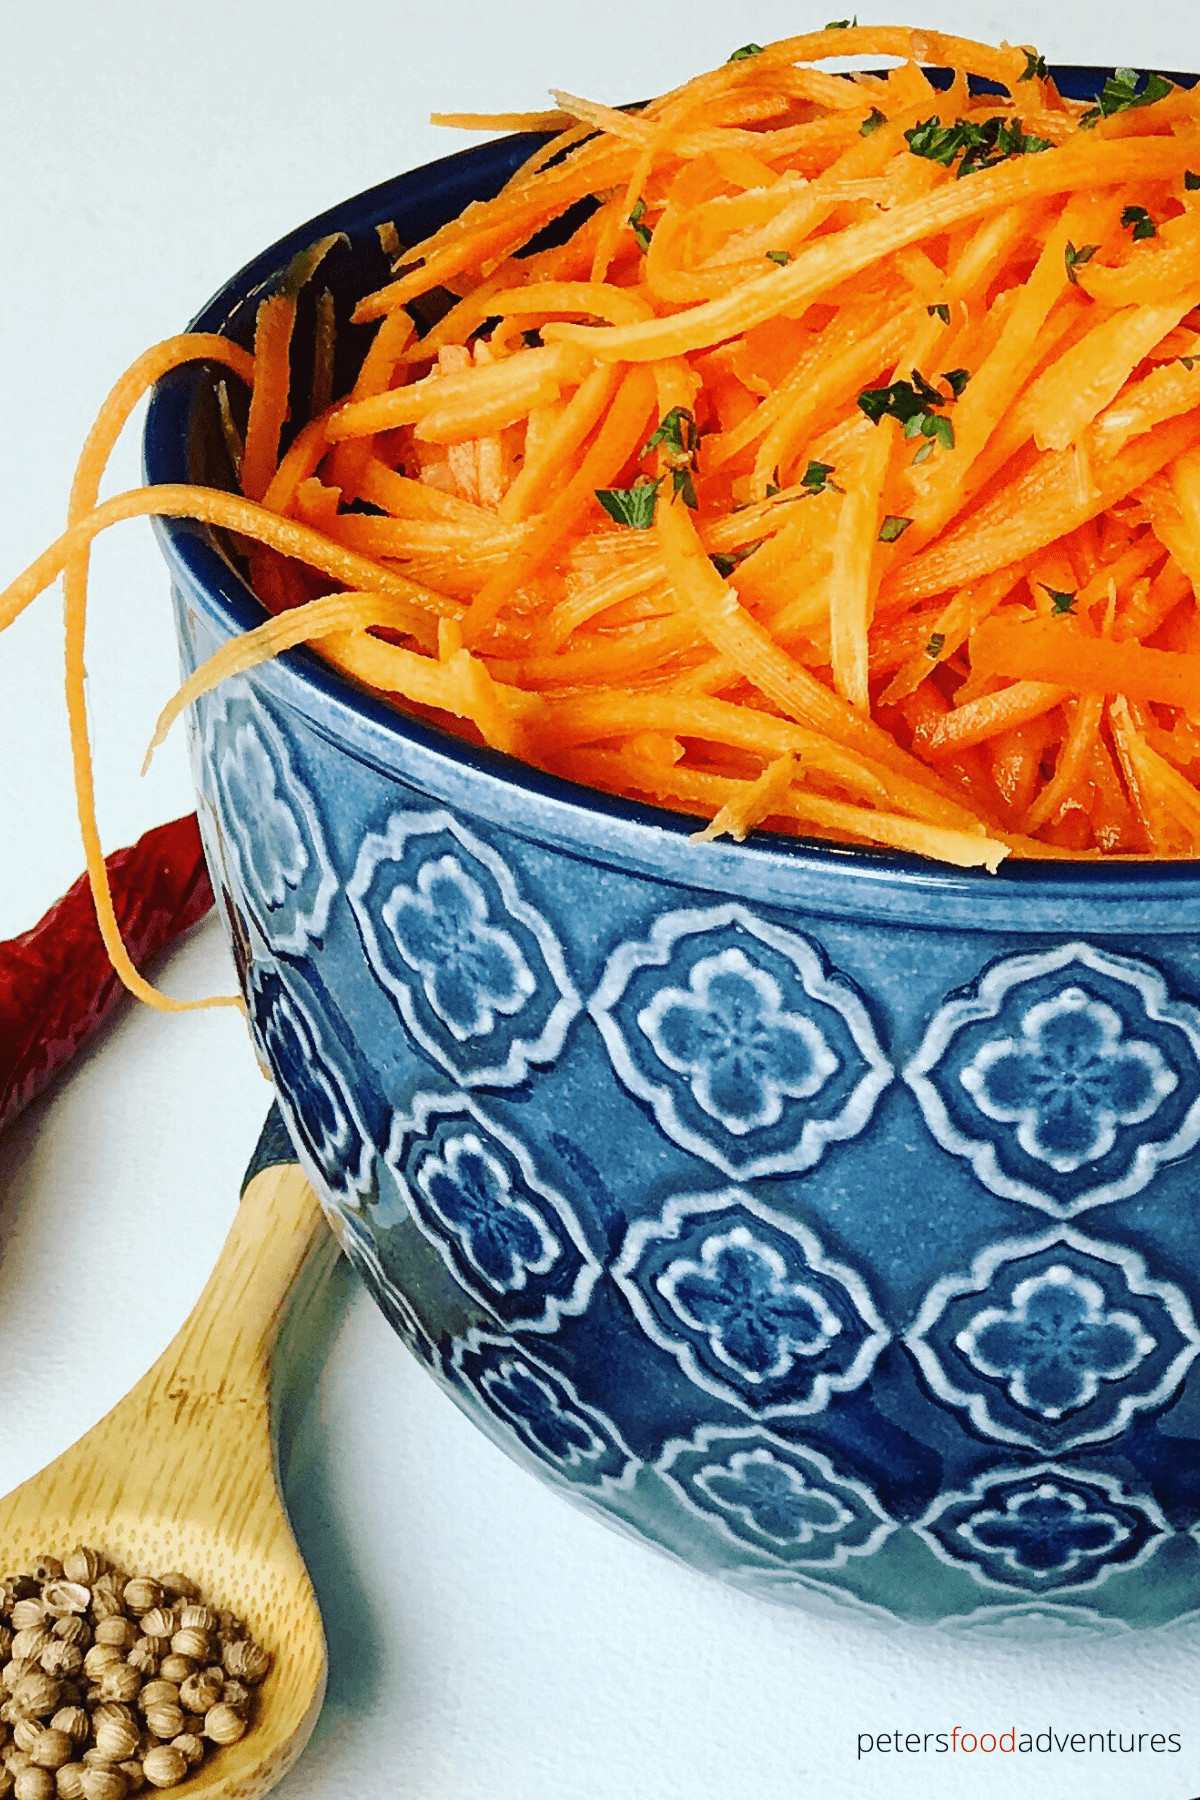 Bowl of shredded carrot salad with coriander seeds